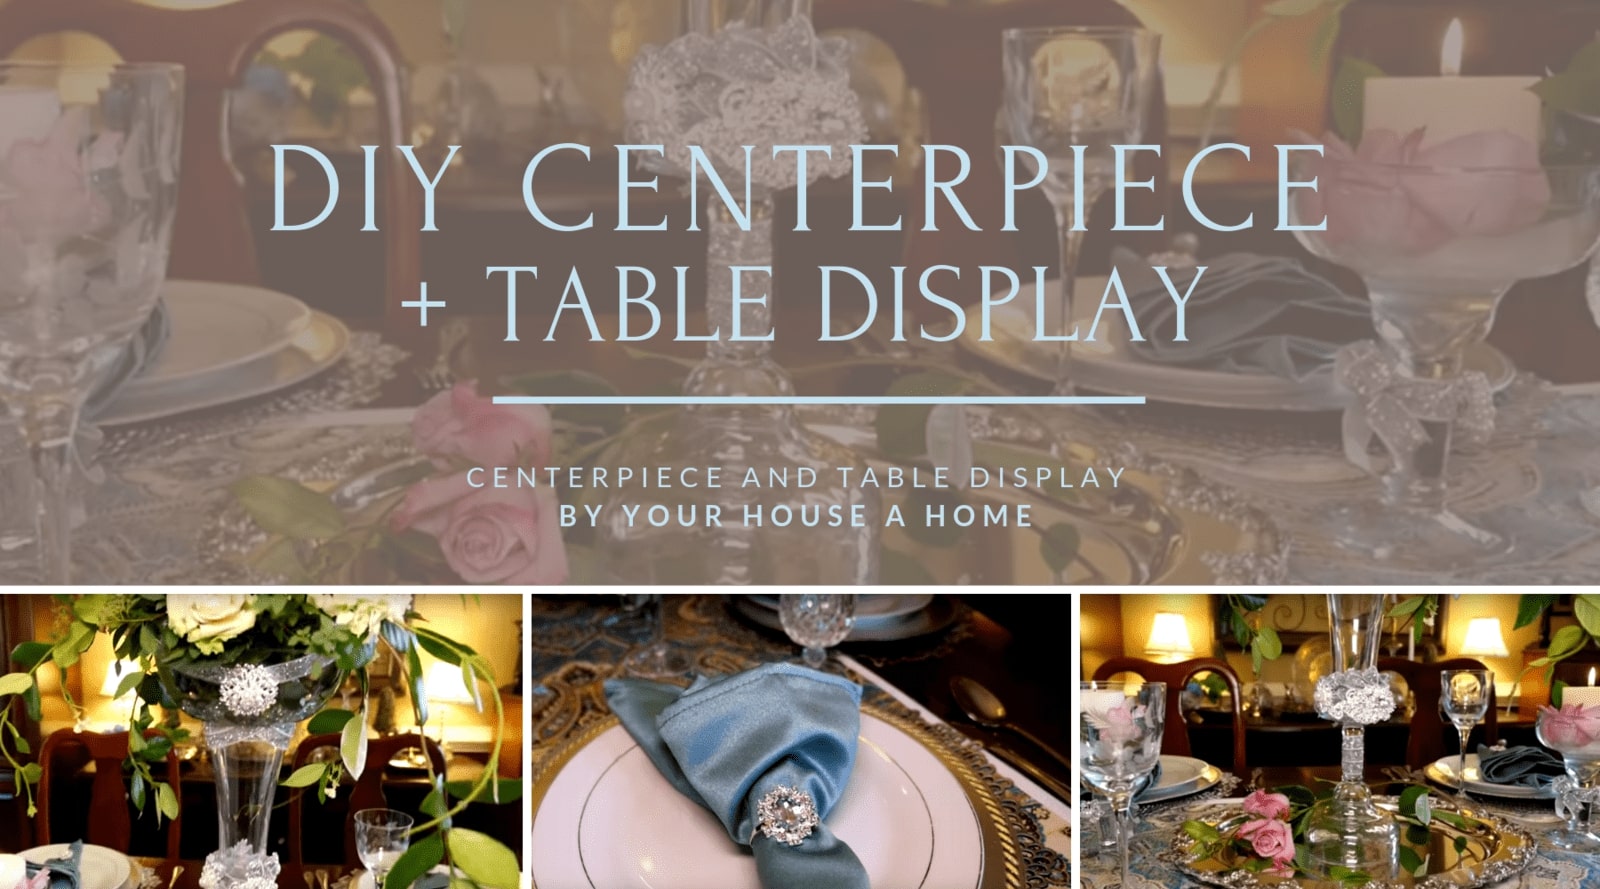 DIY Centerpiece + Table Display by Your House A Home